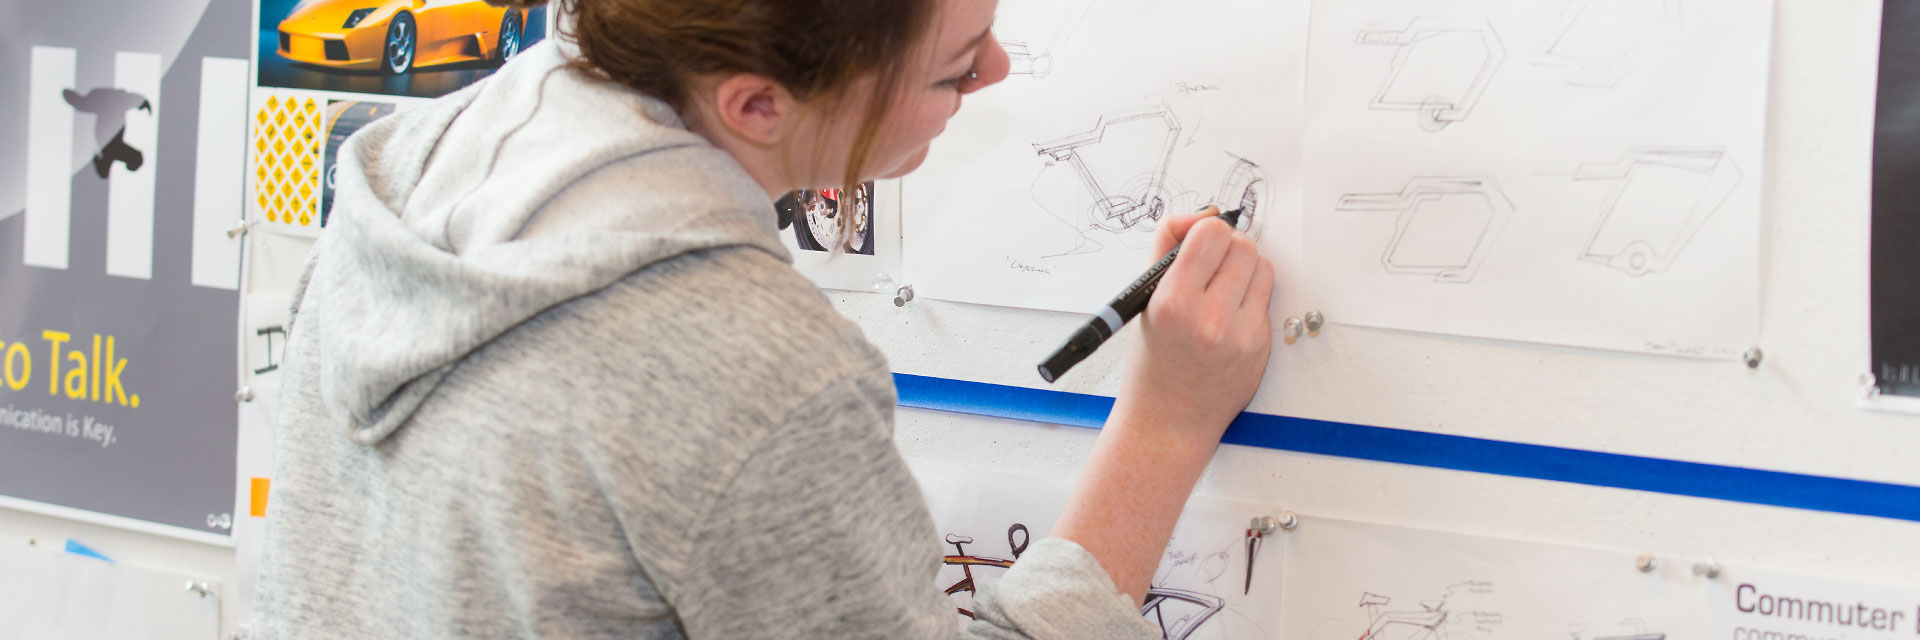 A student sketches on classwork that's pinned to a wall.